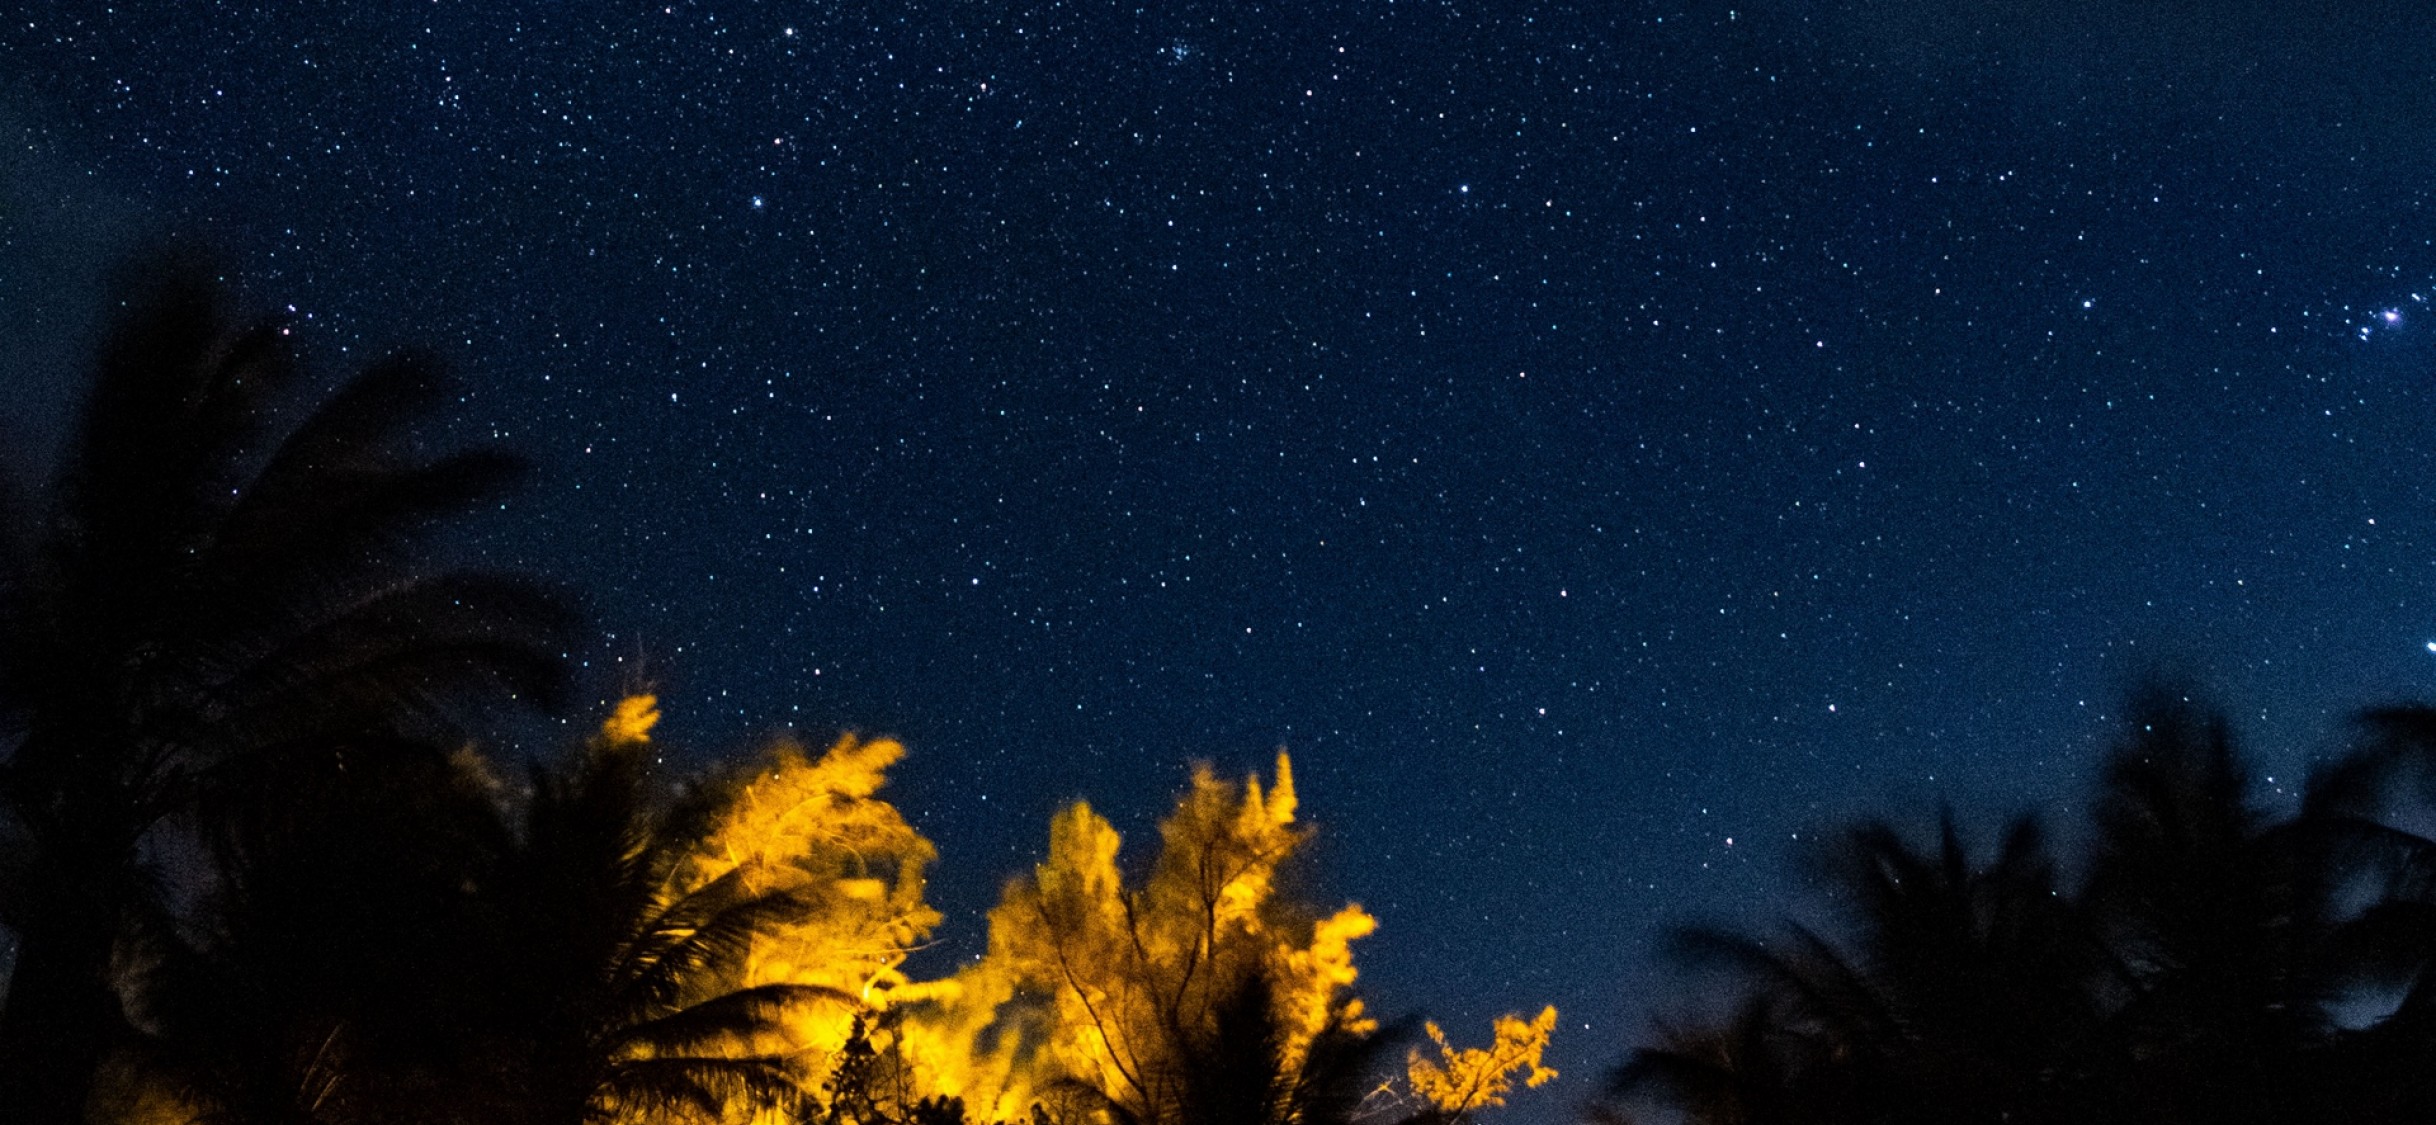 Tropical trees under a starry sky HD Wallpaper